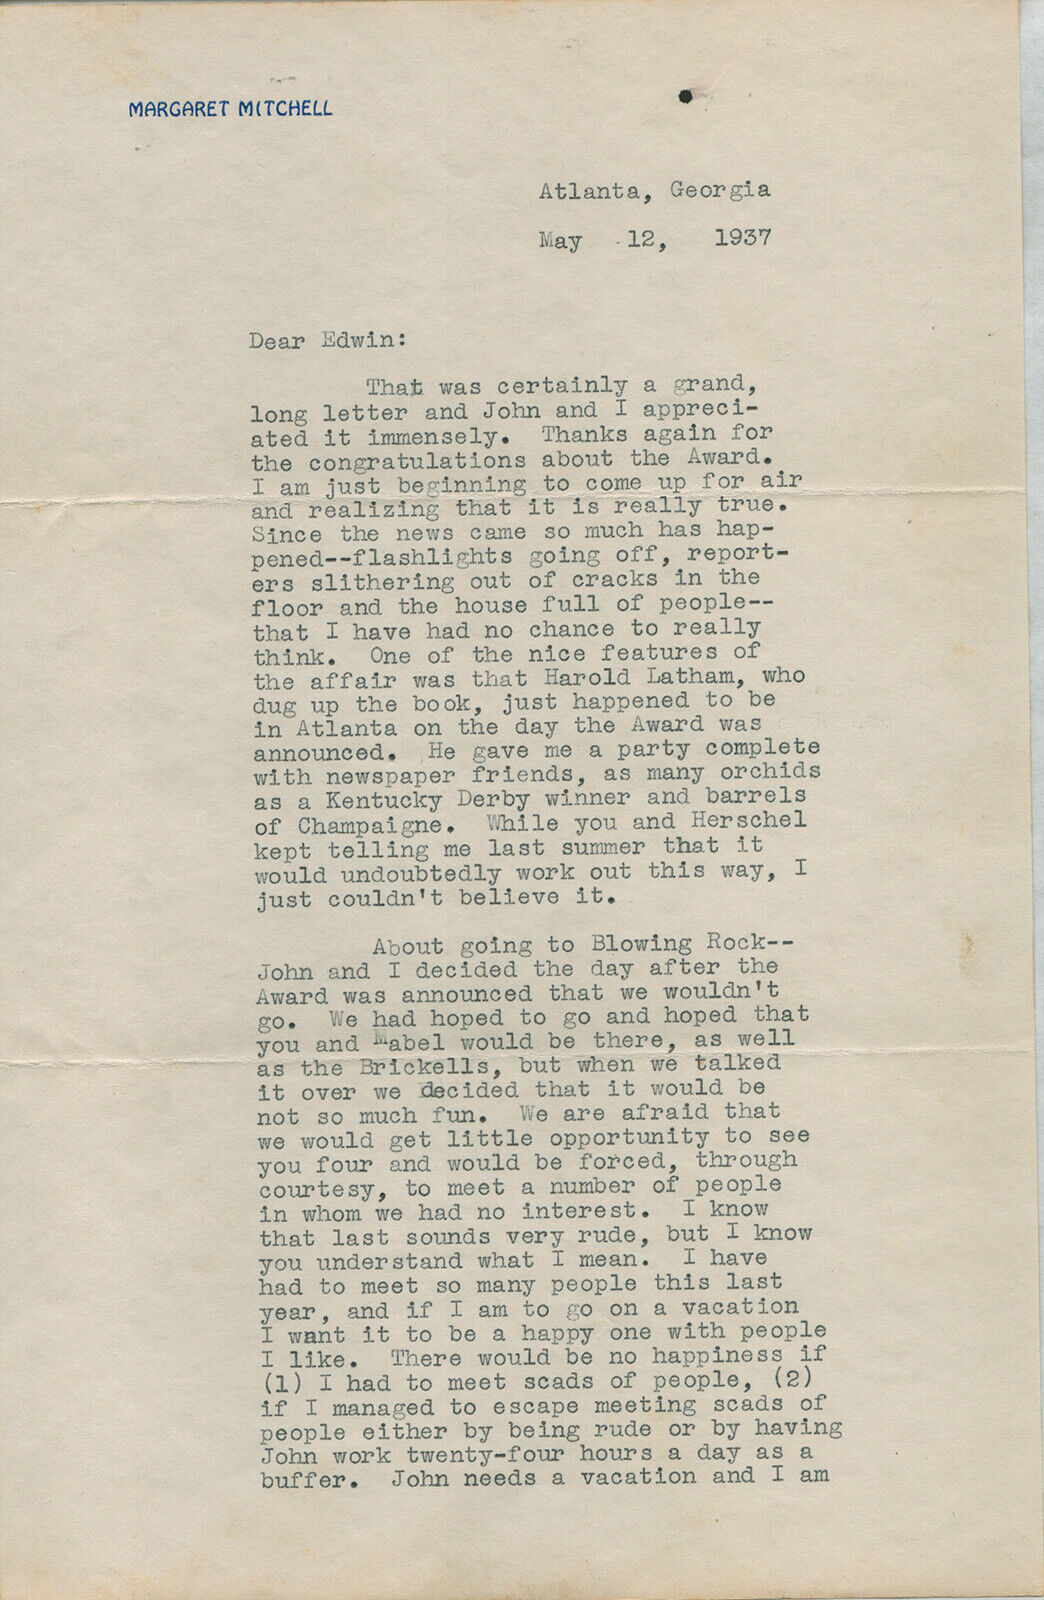 MARGARET MITCHELL - TYPED LETTER SIGNED 05/12/1937